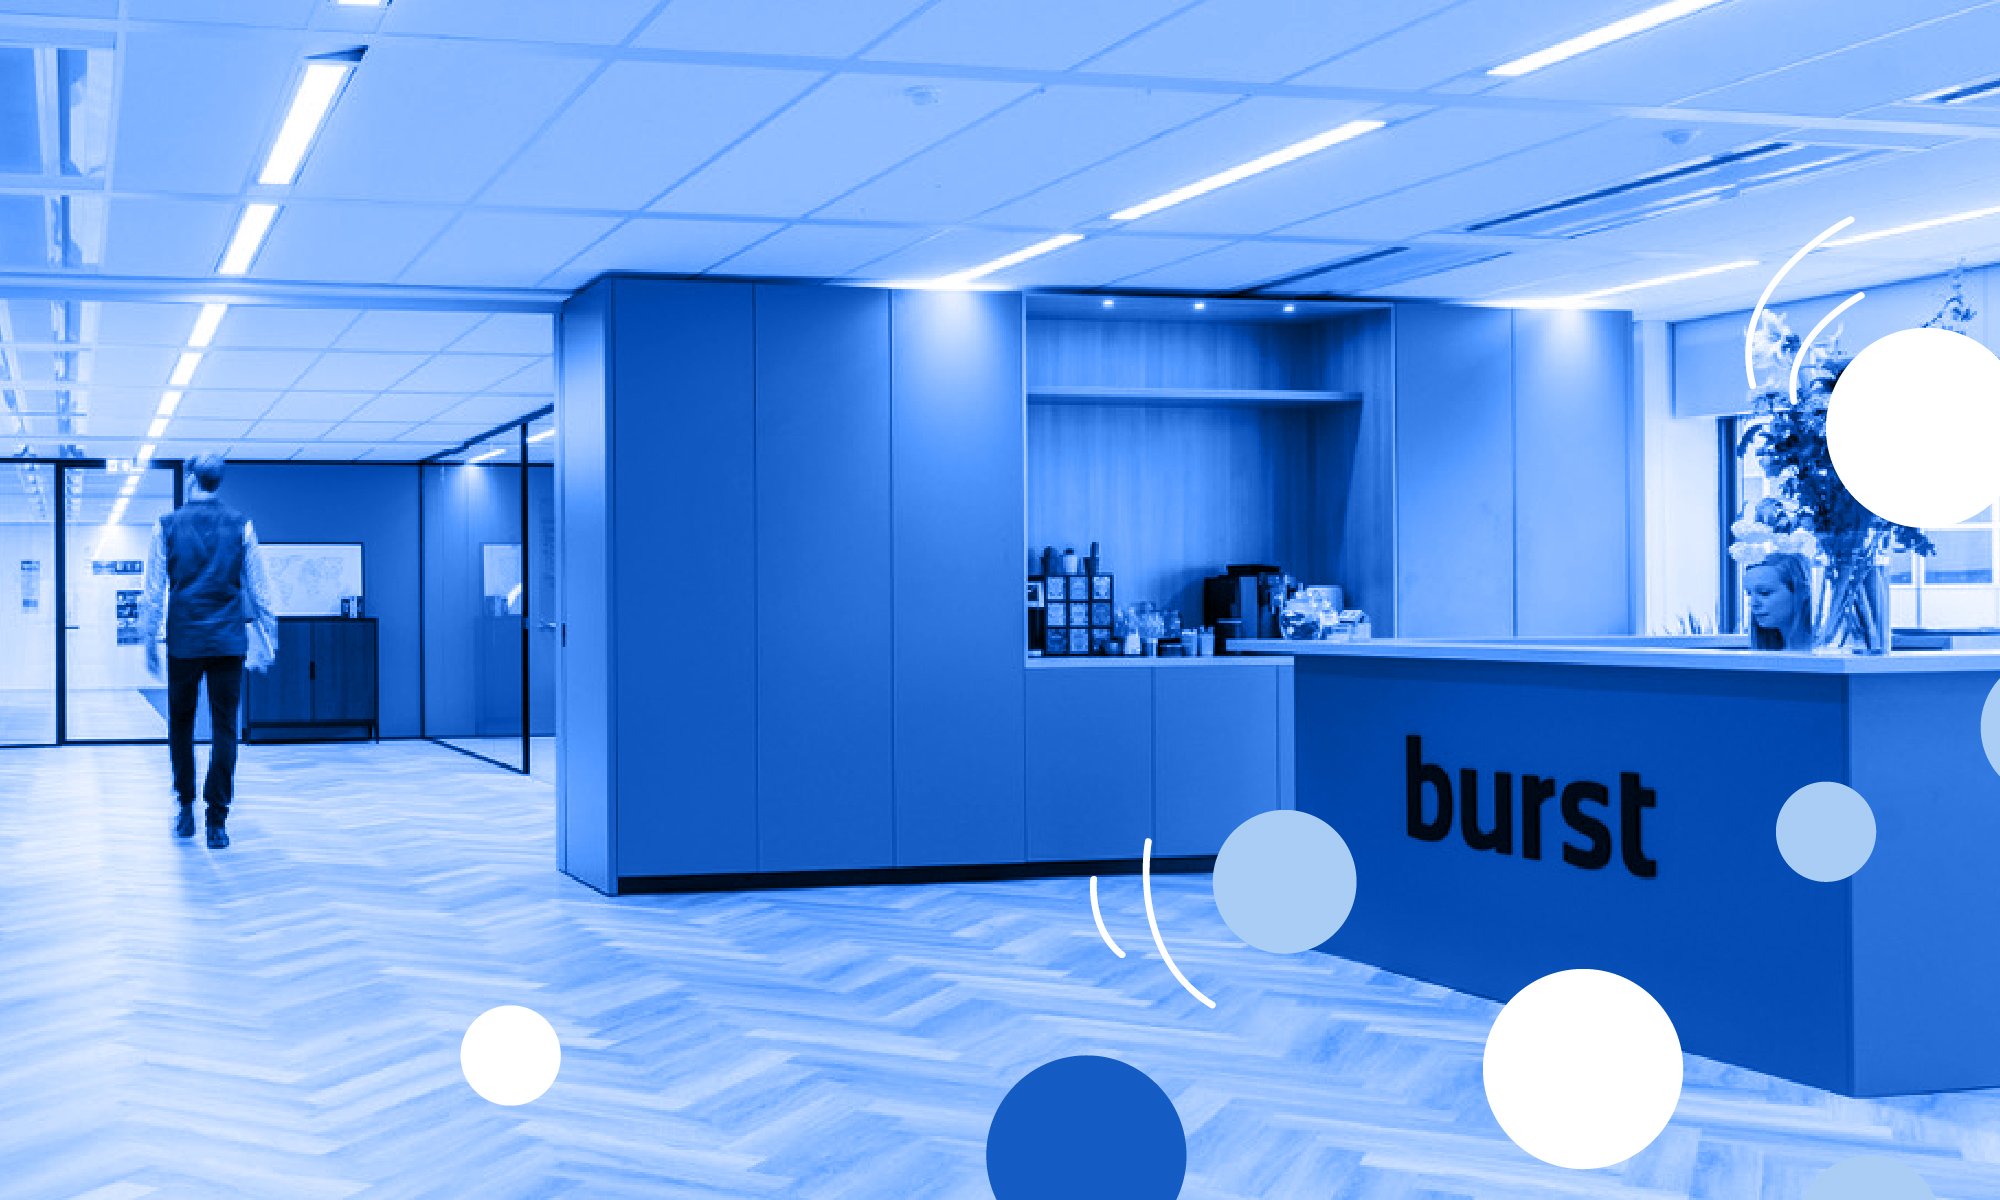 Burst's platform vision and multi-application strategy give global brand Mentos local agility and creative independence